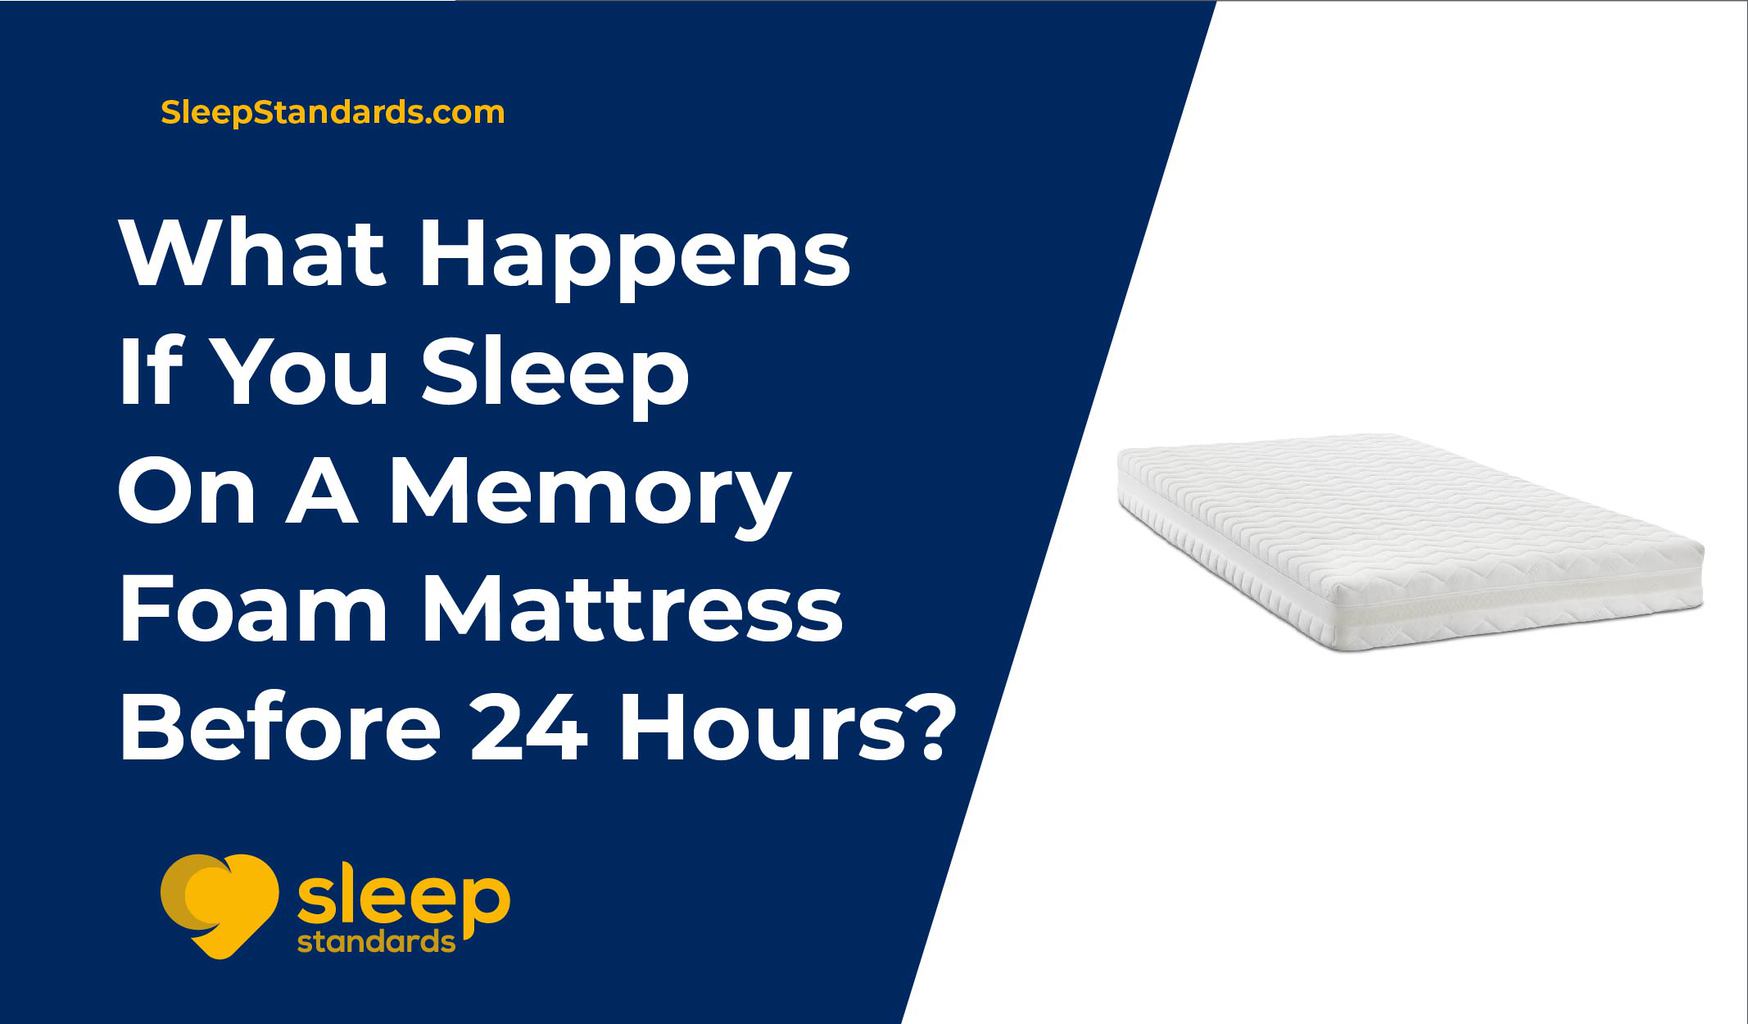 What Happens If You Sleep On A Memory Foam Mattress Before 24 Hours?